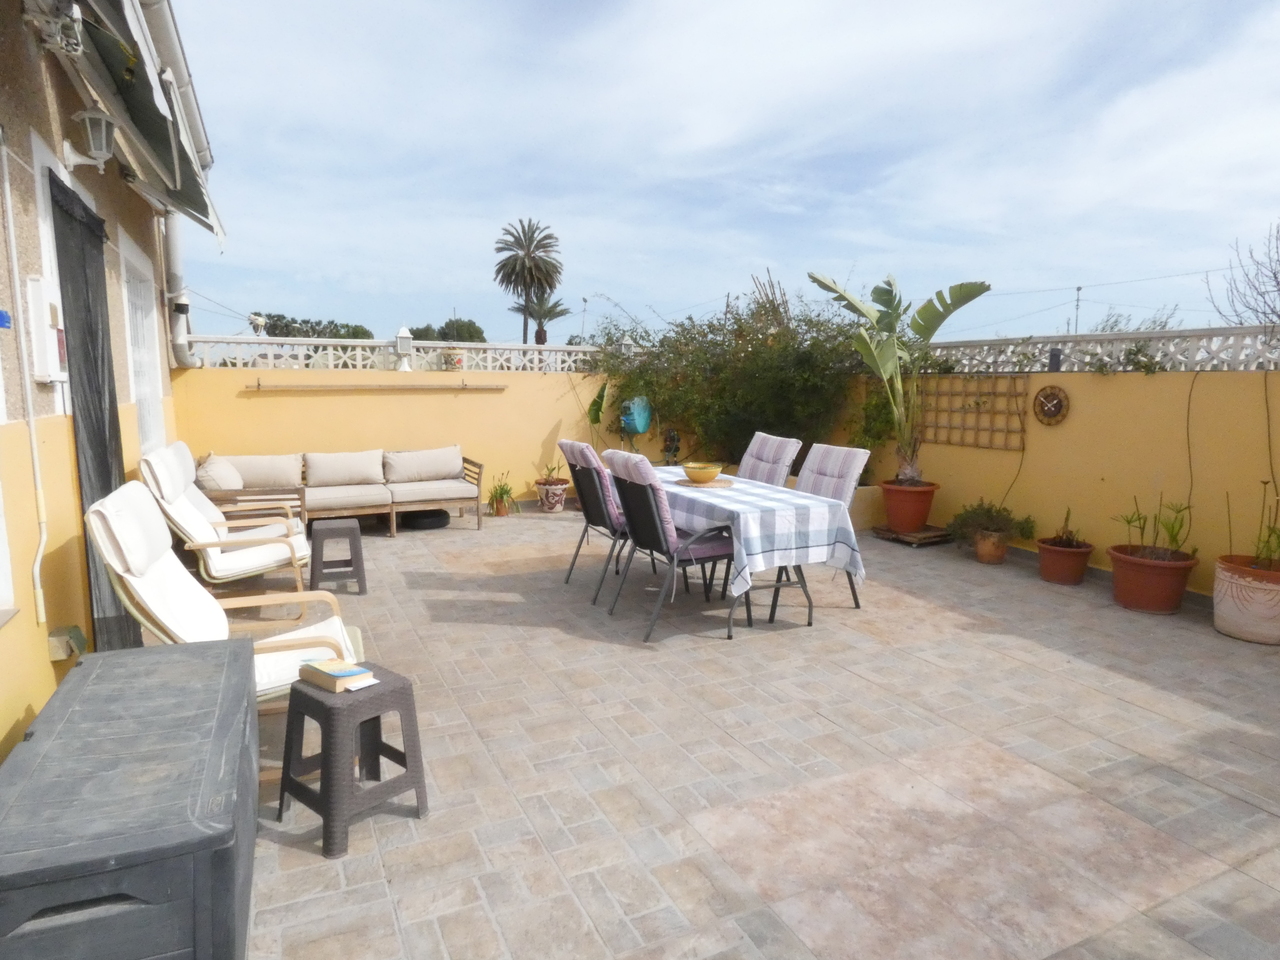 For Sale: 
Townhouse in Orihuela Beds: 2 Baths: 2 Price: 139,995€